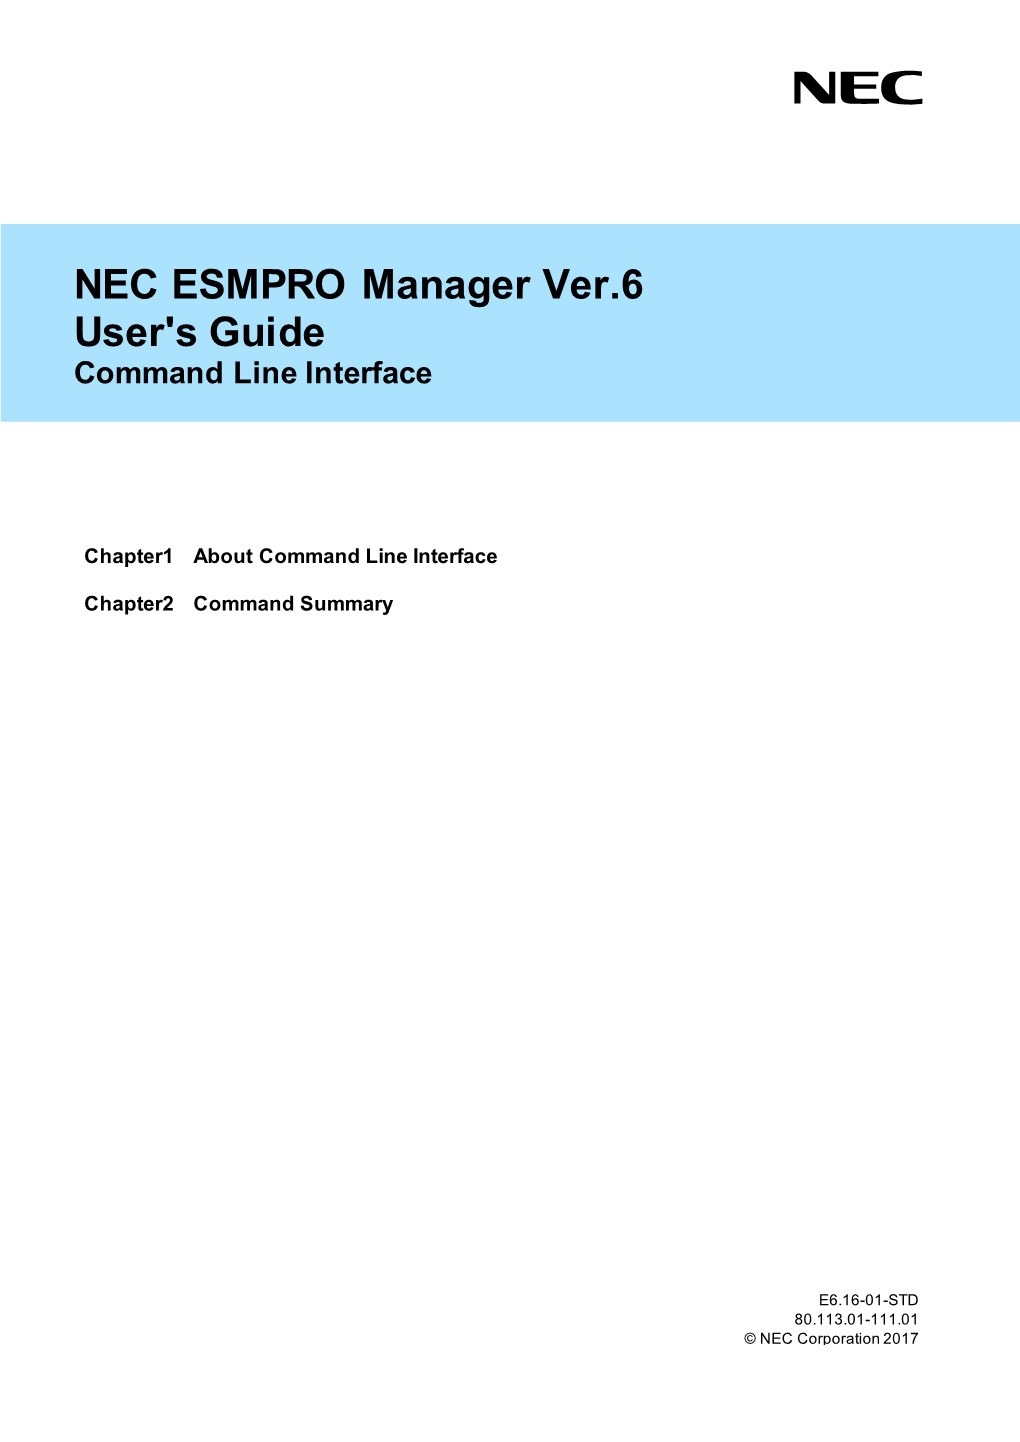 NEC ESMPRO Manager Ver.6 User's Guide Command Line Interface